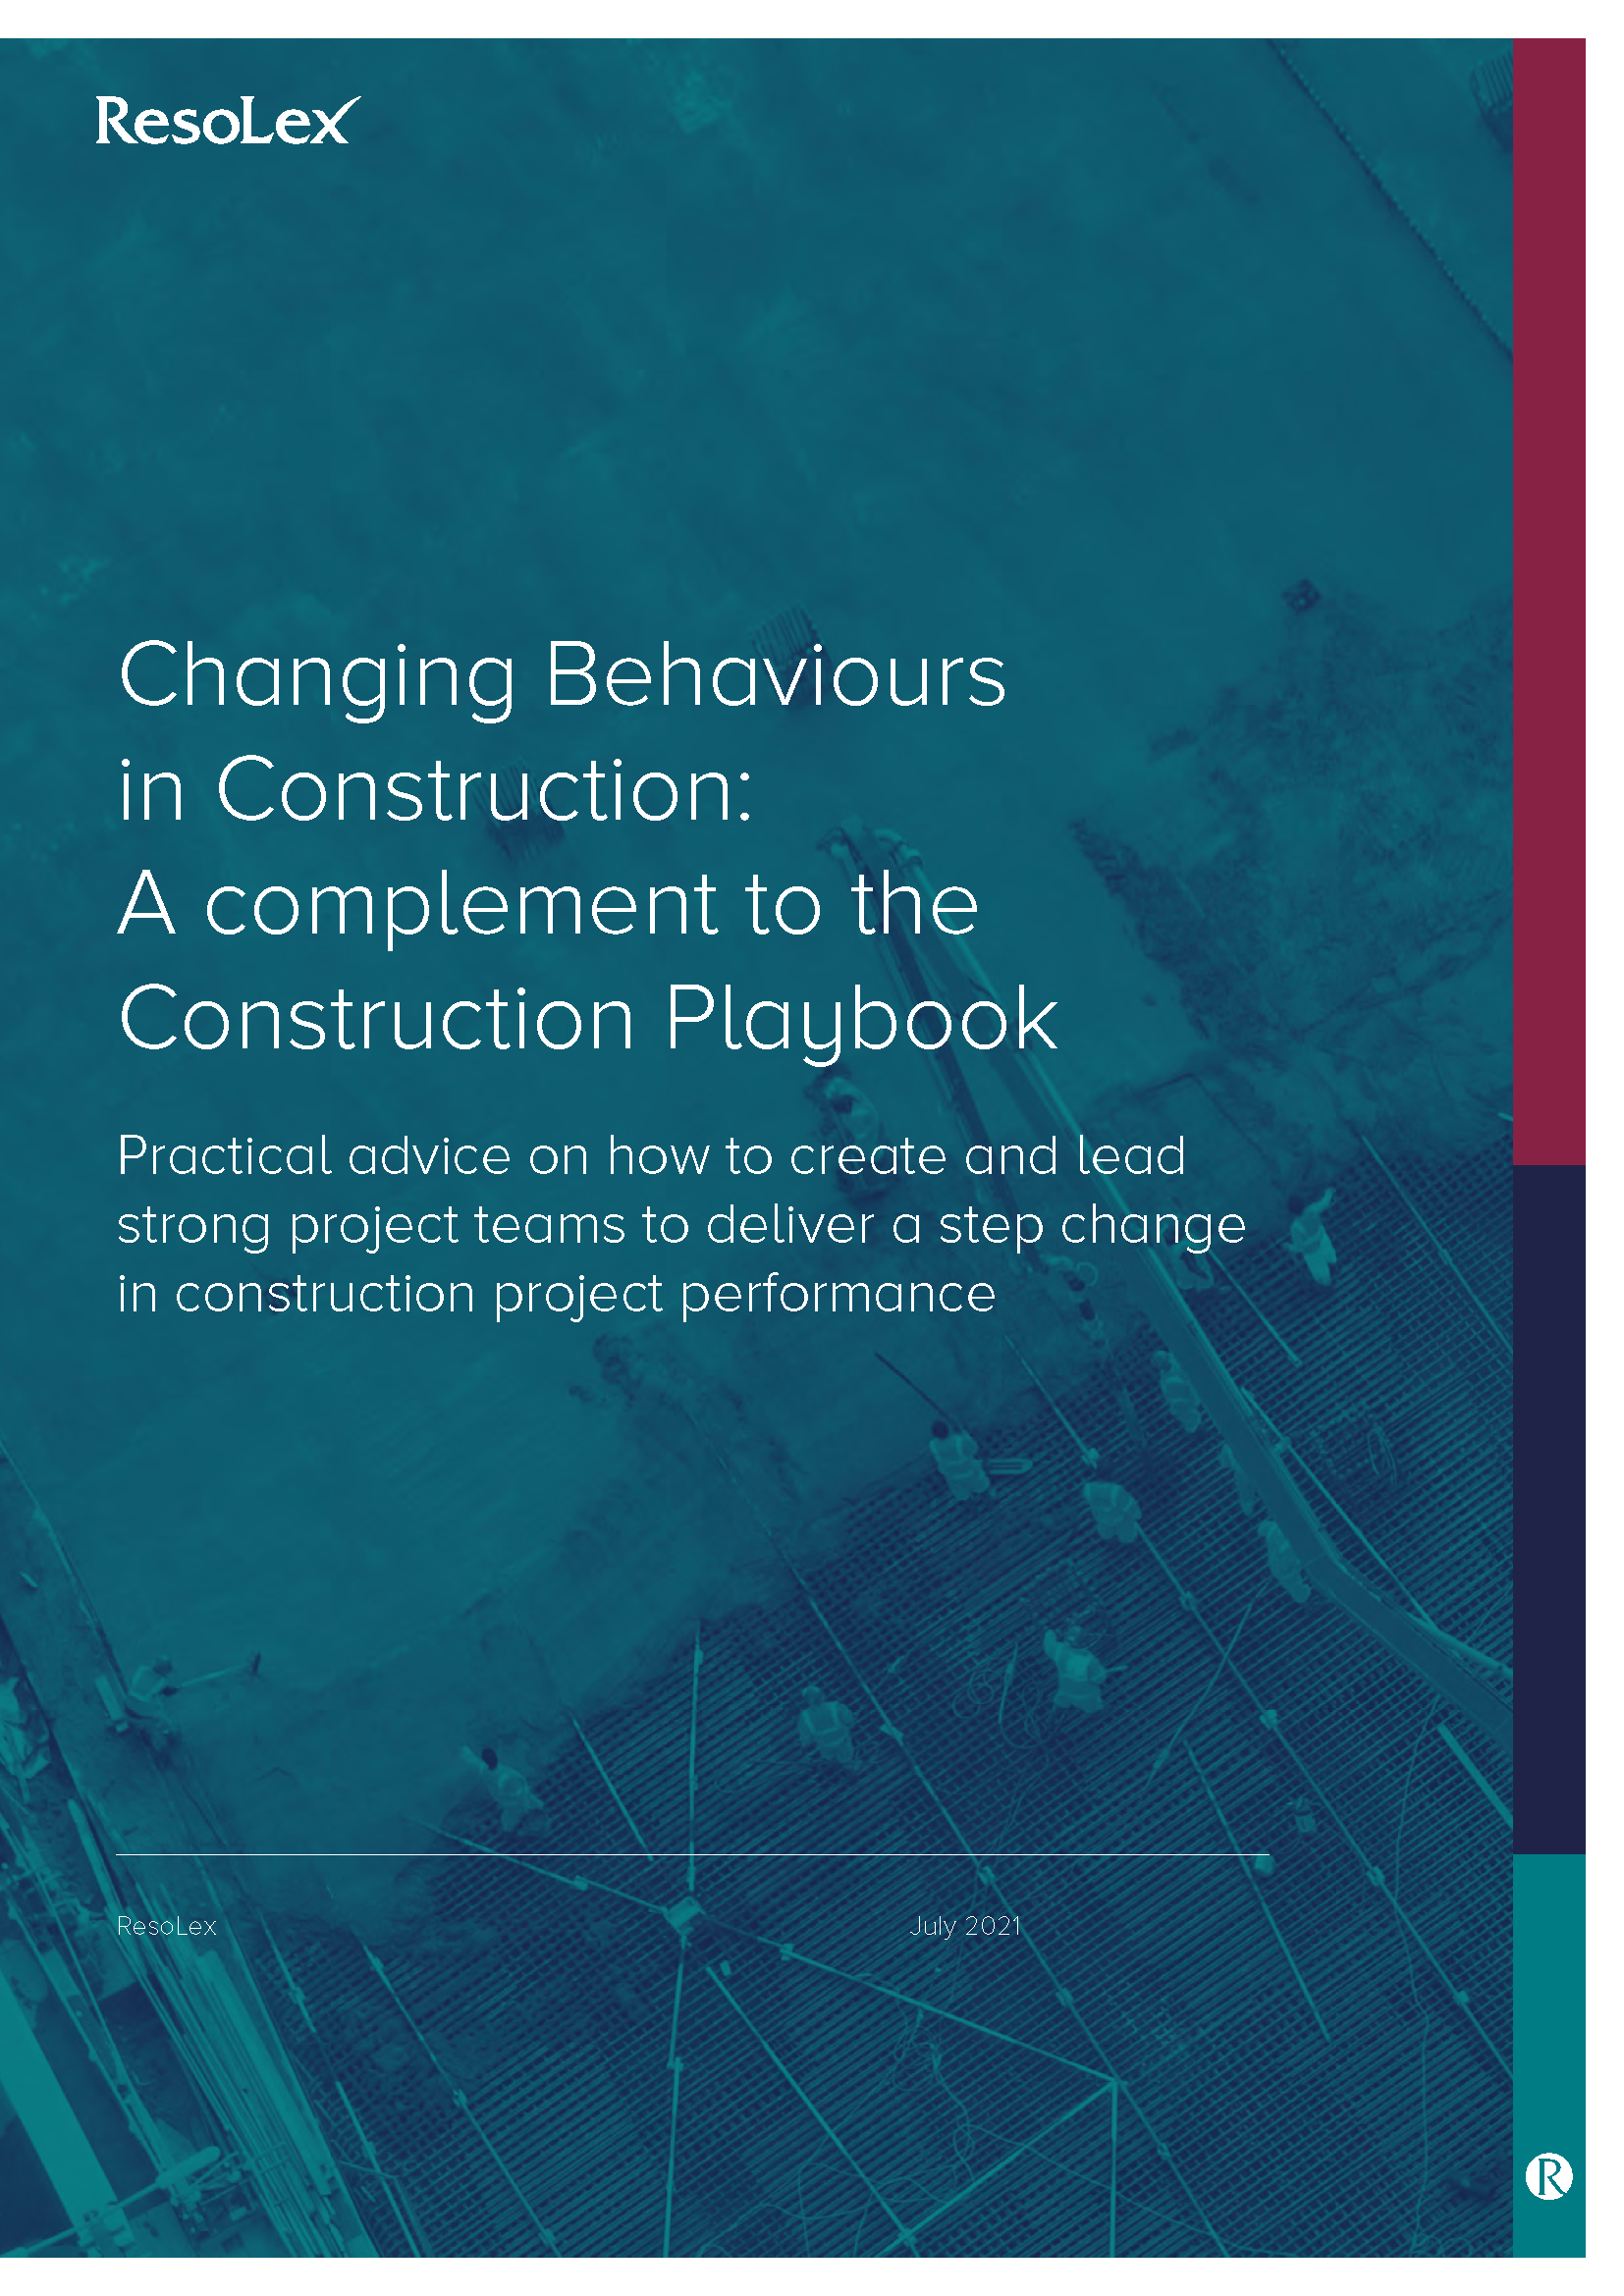 Changing Behaviours in Construction: a complement to the Construction Playbook